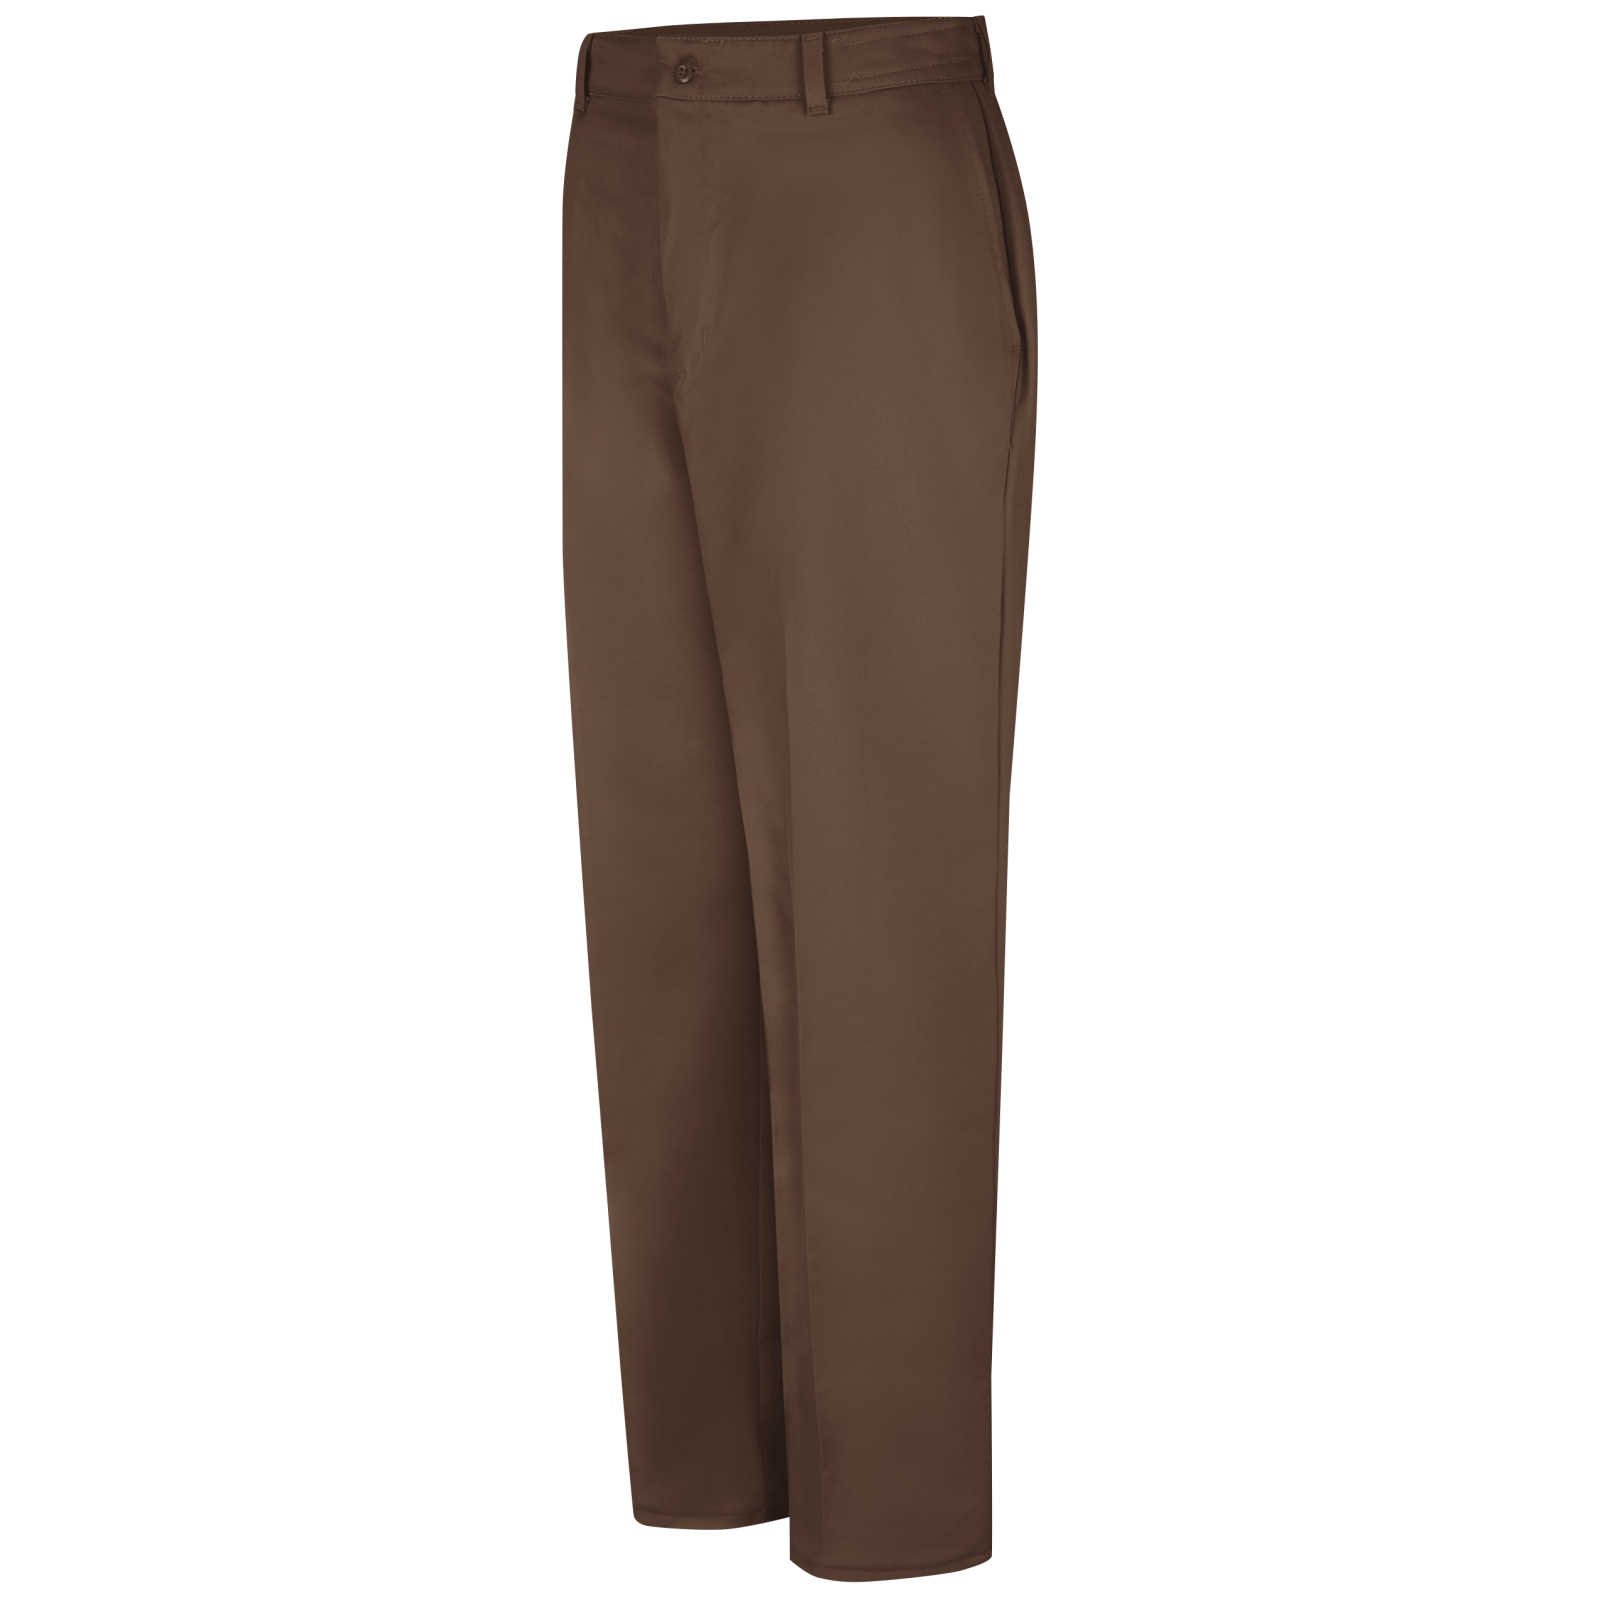 High Quality Cotton Mens Formal Trousers Sale Pants For Casual Office,  Business, Wedding, Party, And Social Events Style 221008 From Kua01, $23.23  | DHgate.Com